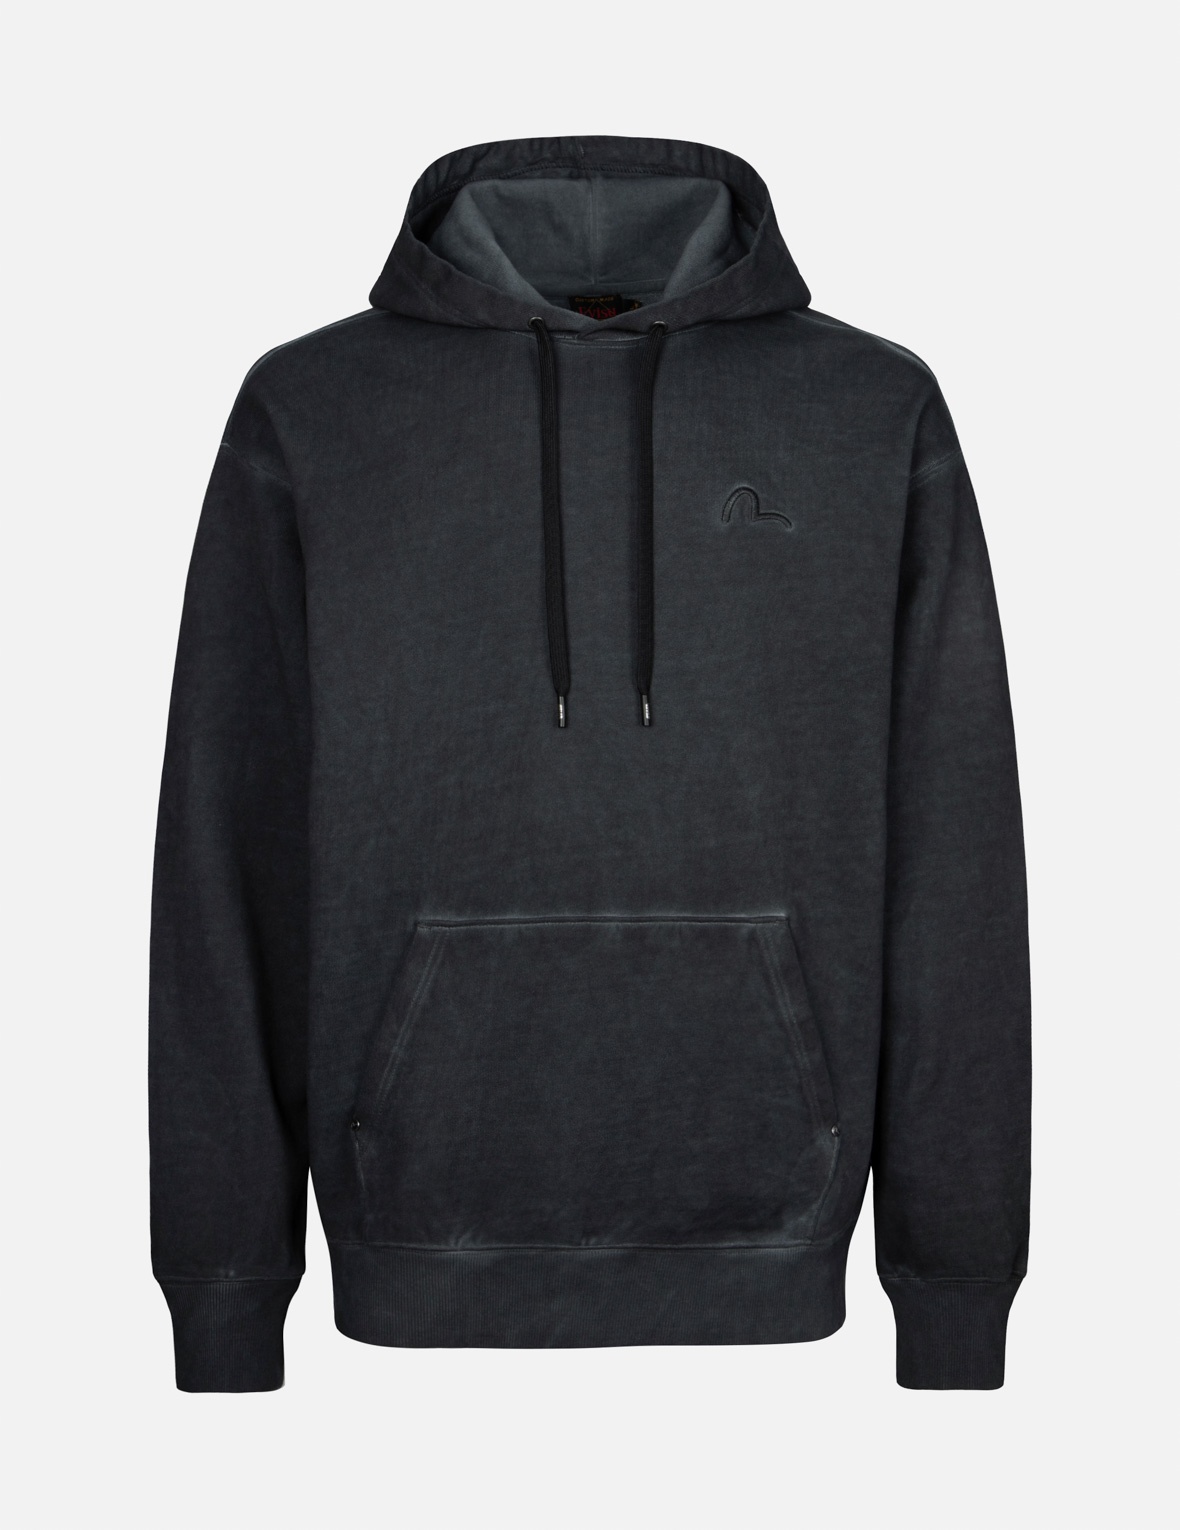 SEAGULL AND LOGO PRINT RELAX FIT HOODIE - 2